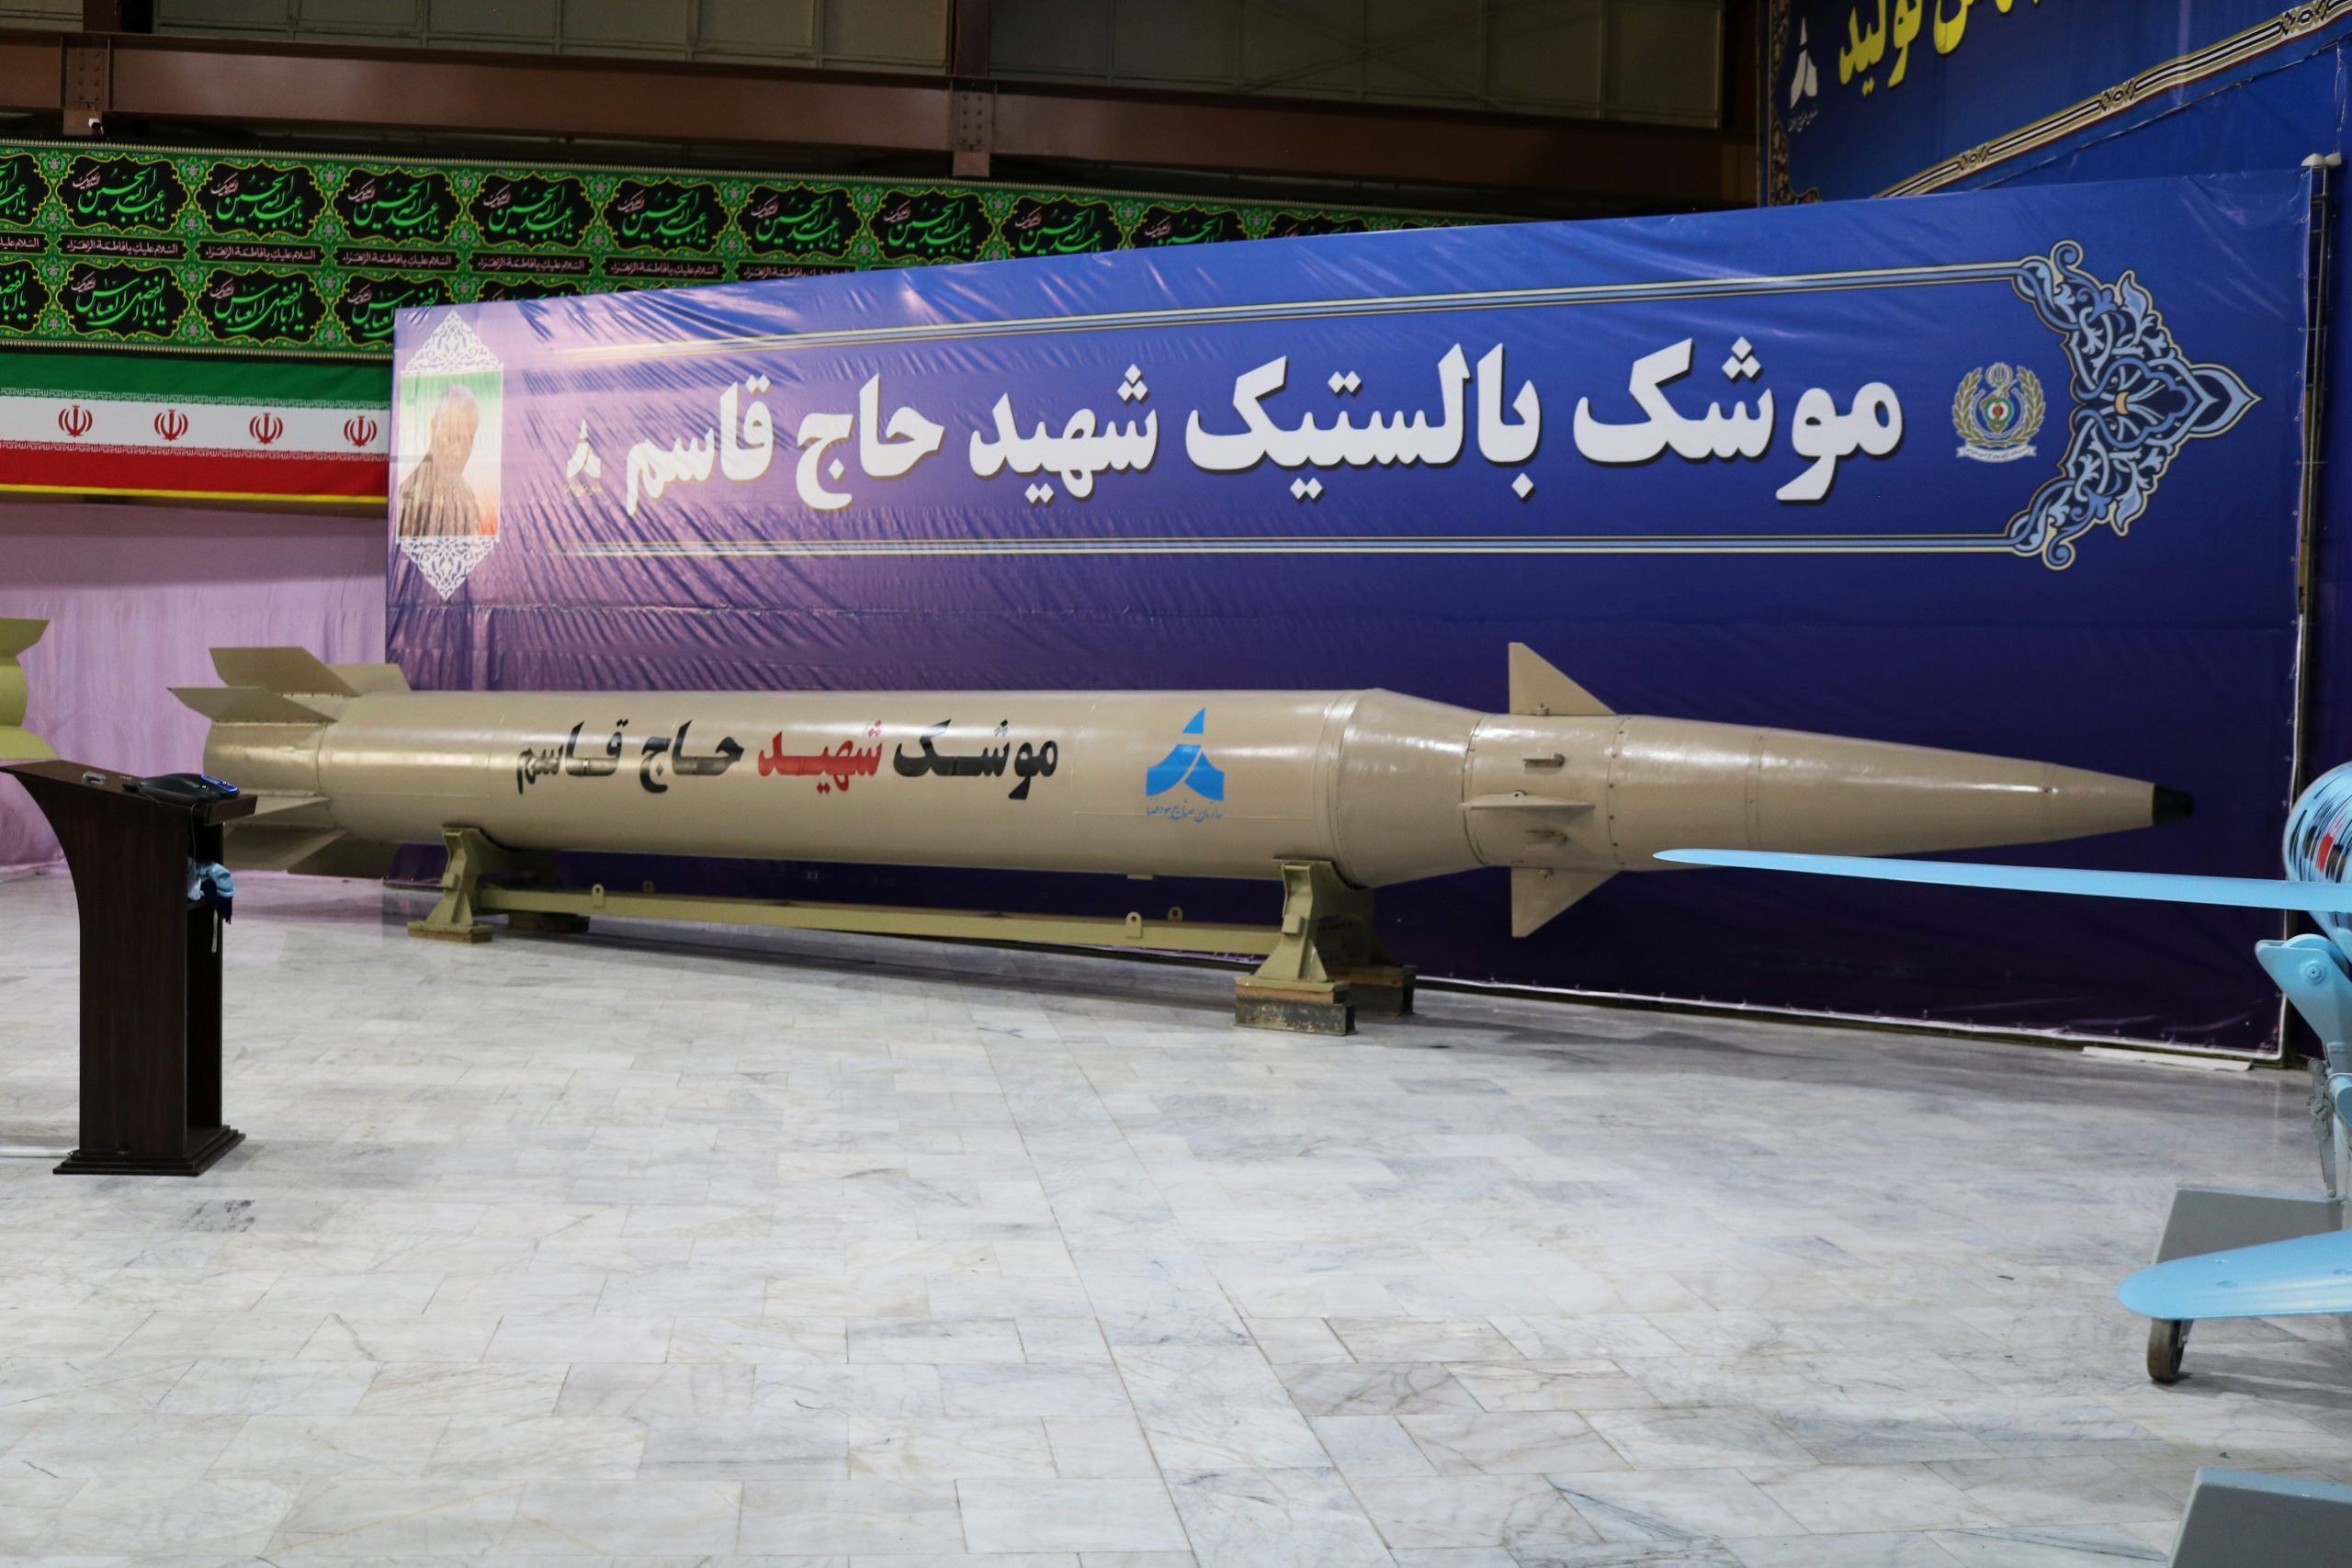 2020-08-20T094924Z_1907302938_RC2LHI9RV60A_RTRMADP_3_IRAN-MILITARY-MISSILES-scaled